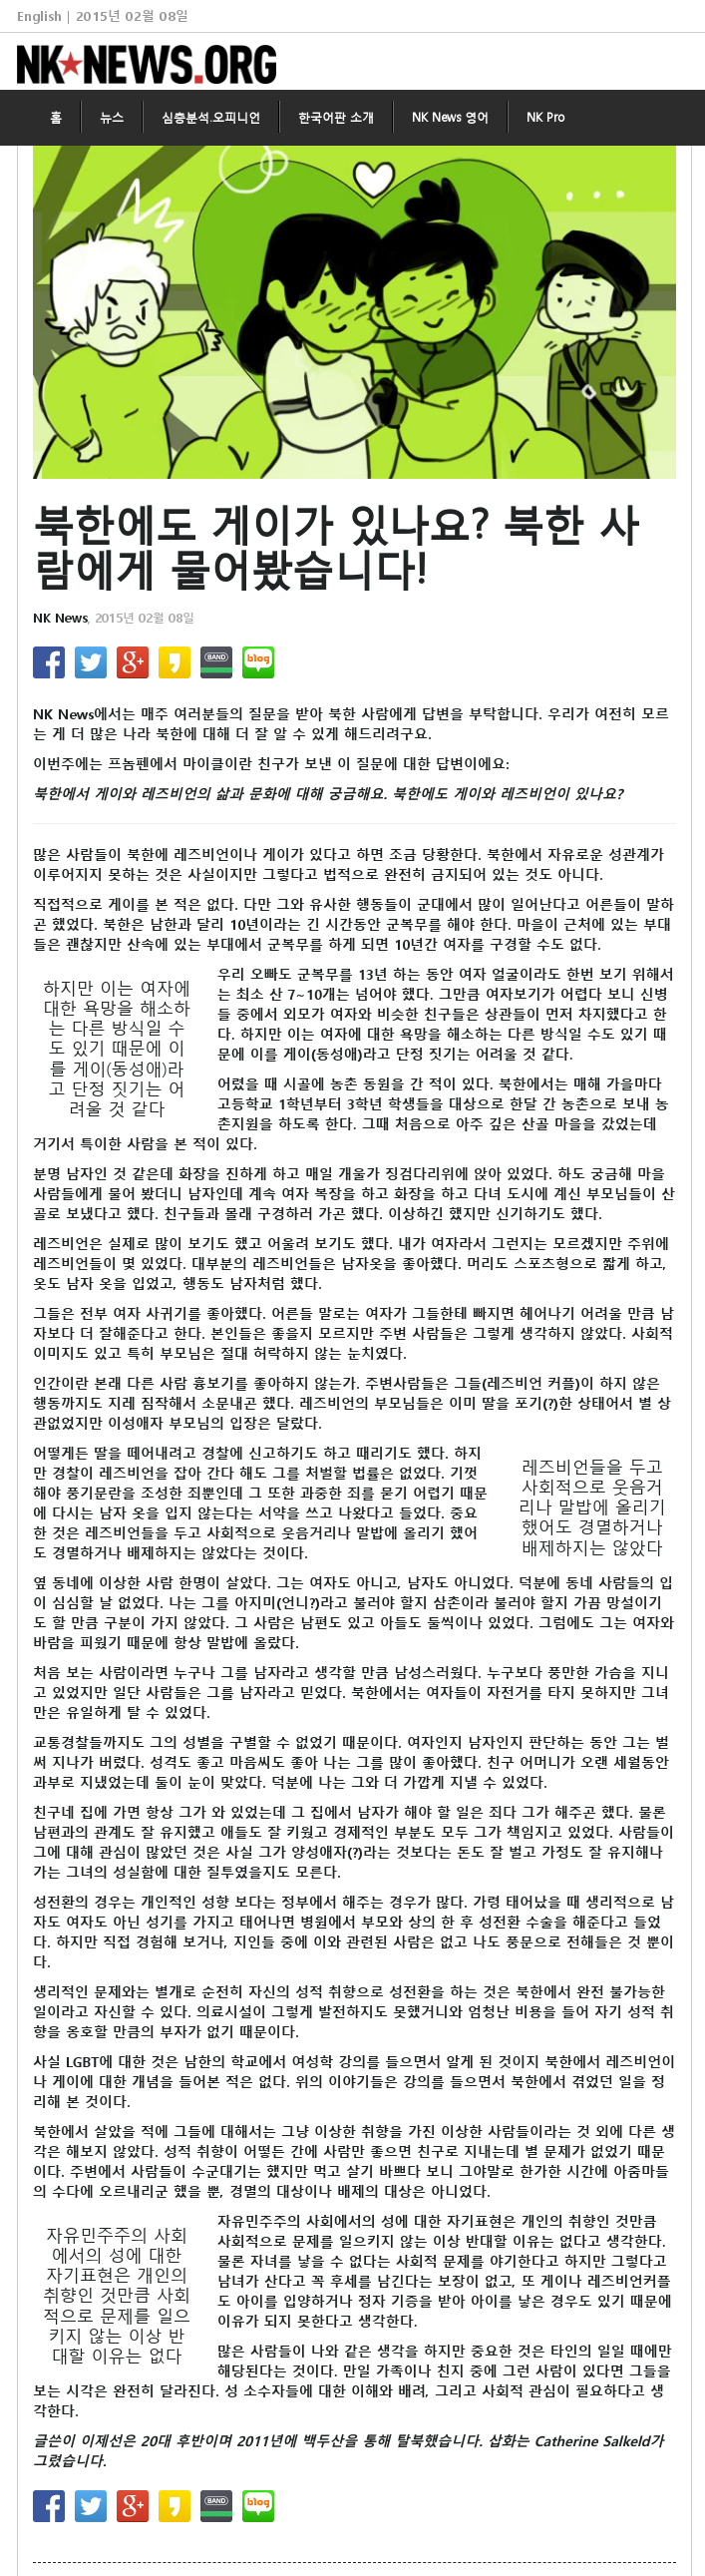 NK News article about LGBT.png